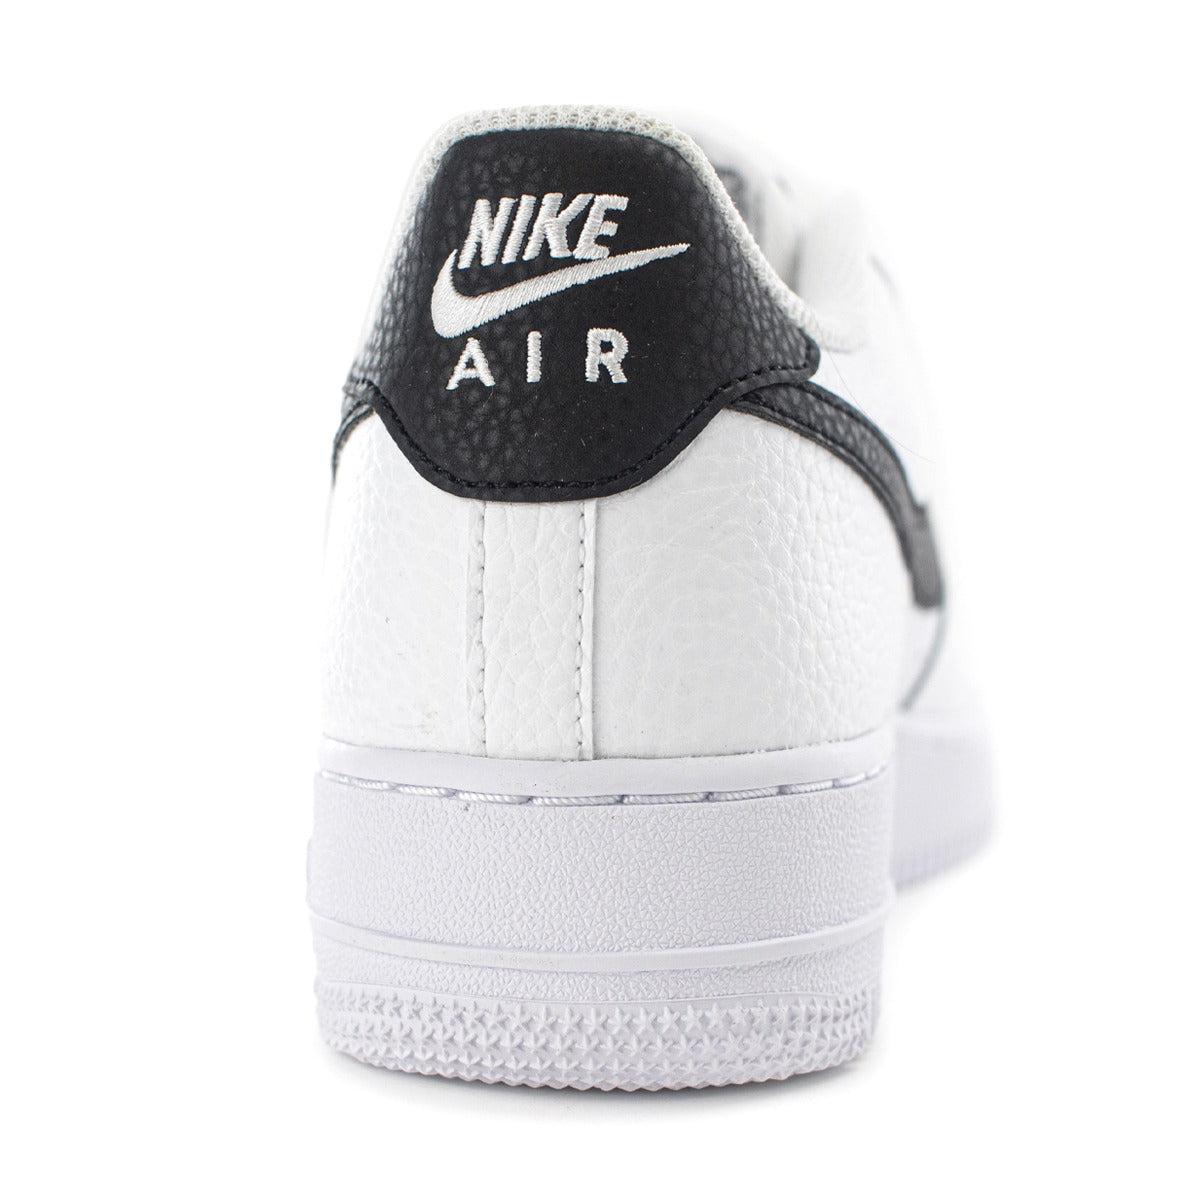 Nike Air Force 1 (GS) CT3839-100-